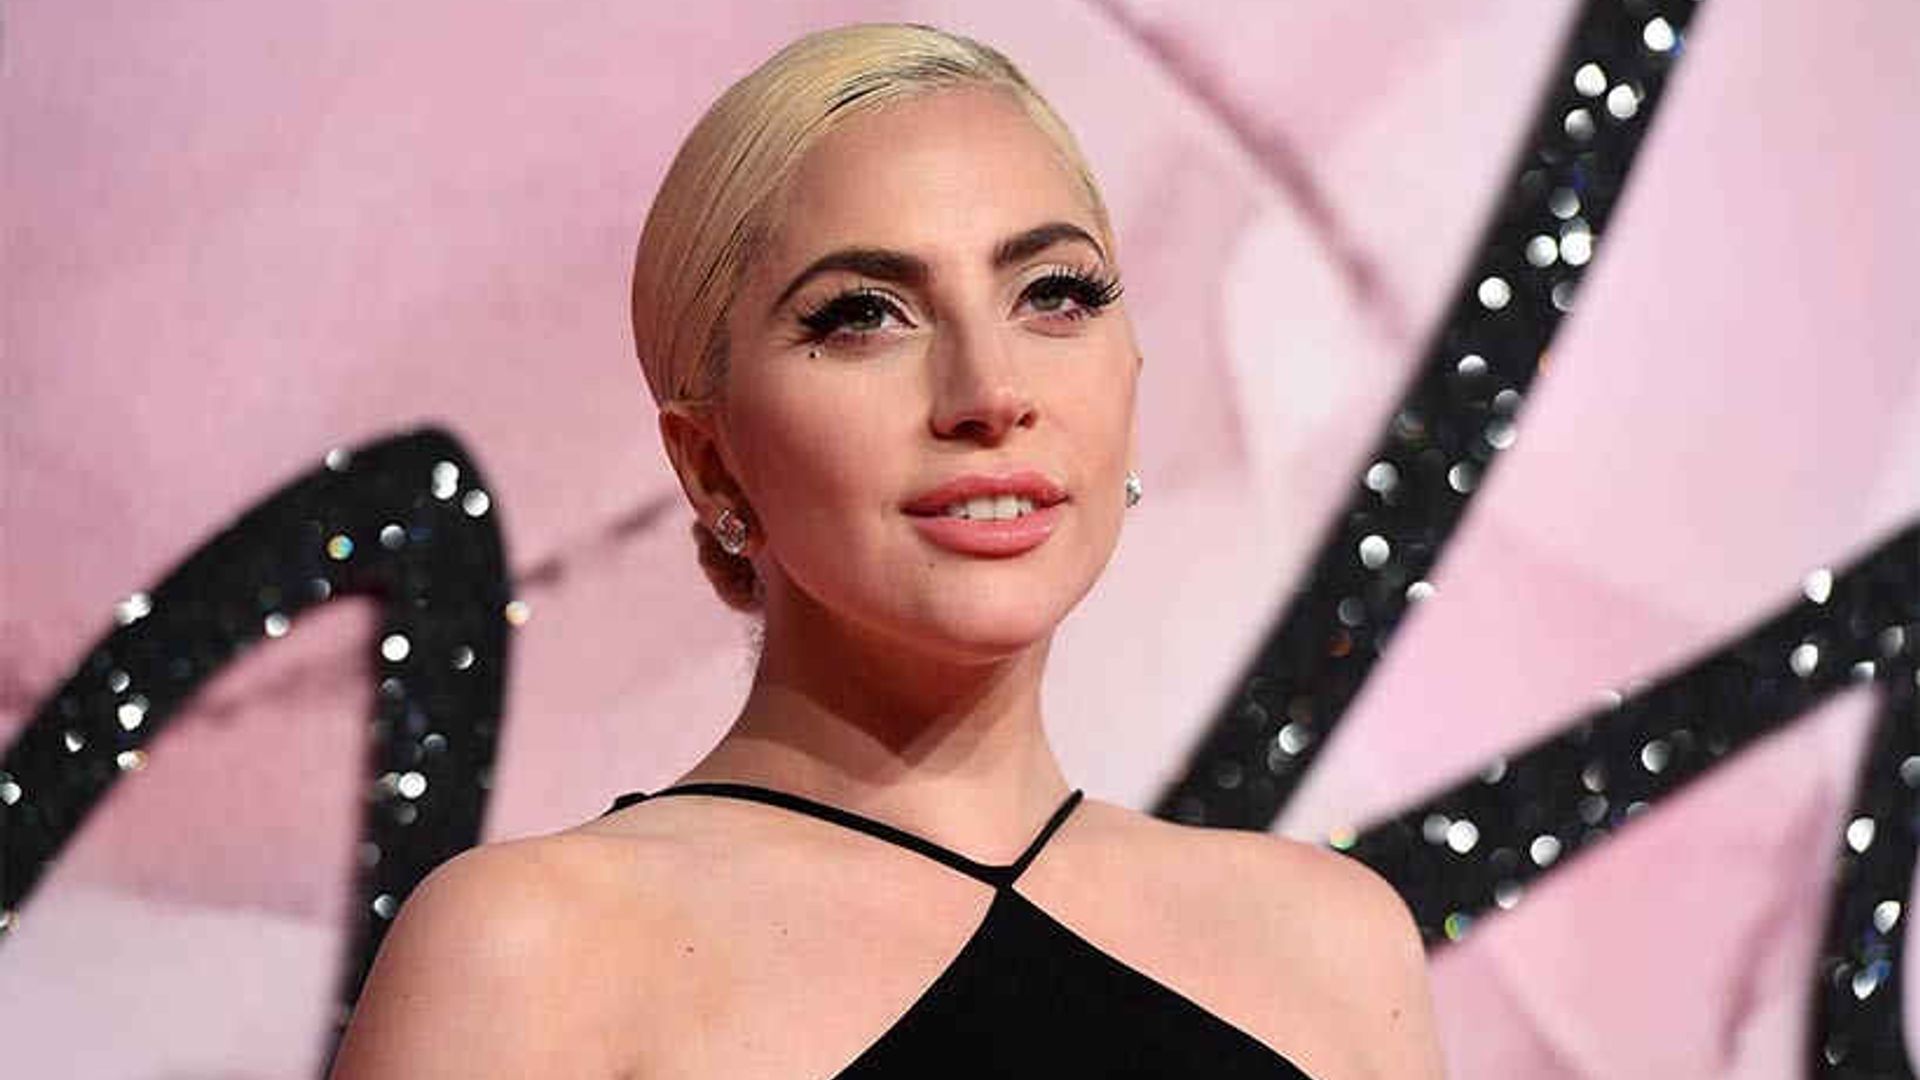 Lady Gaga's new makeup line: here's everything we know